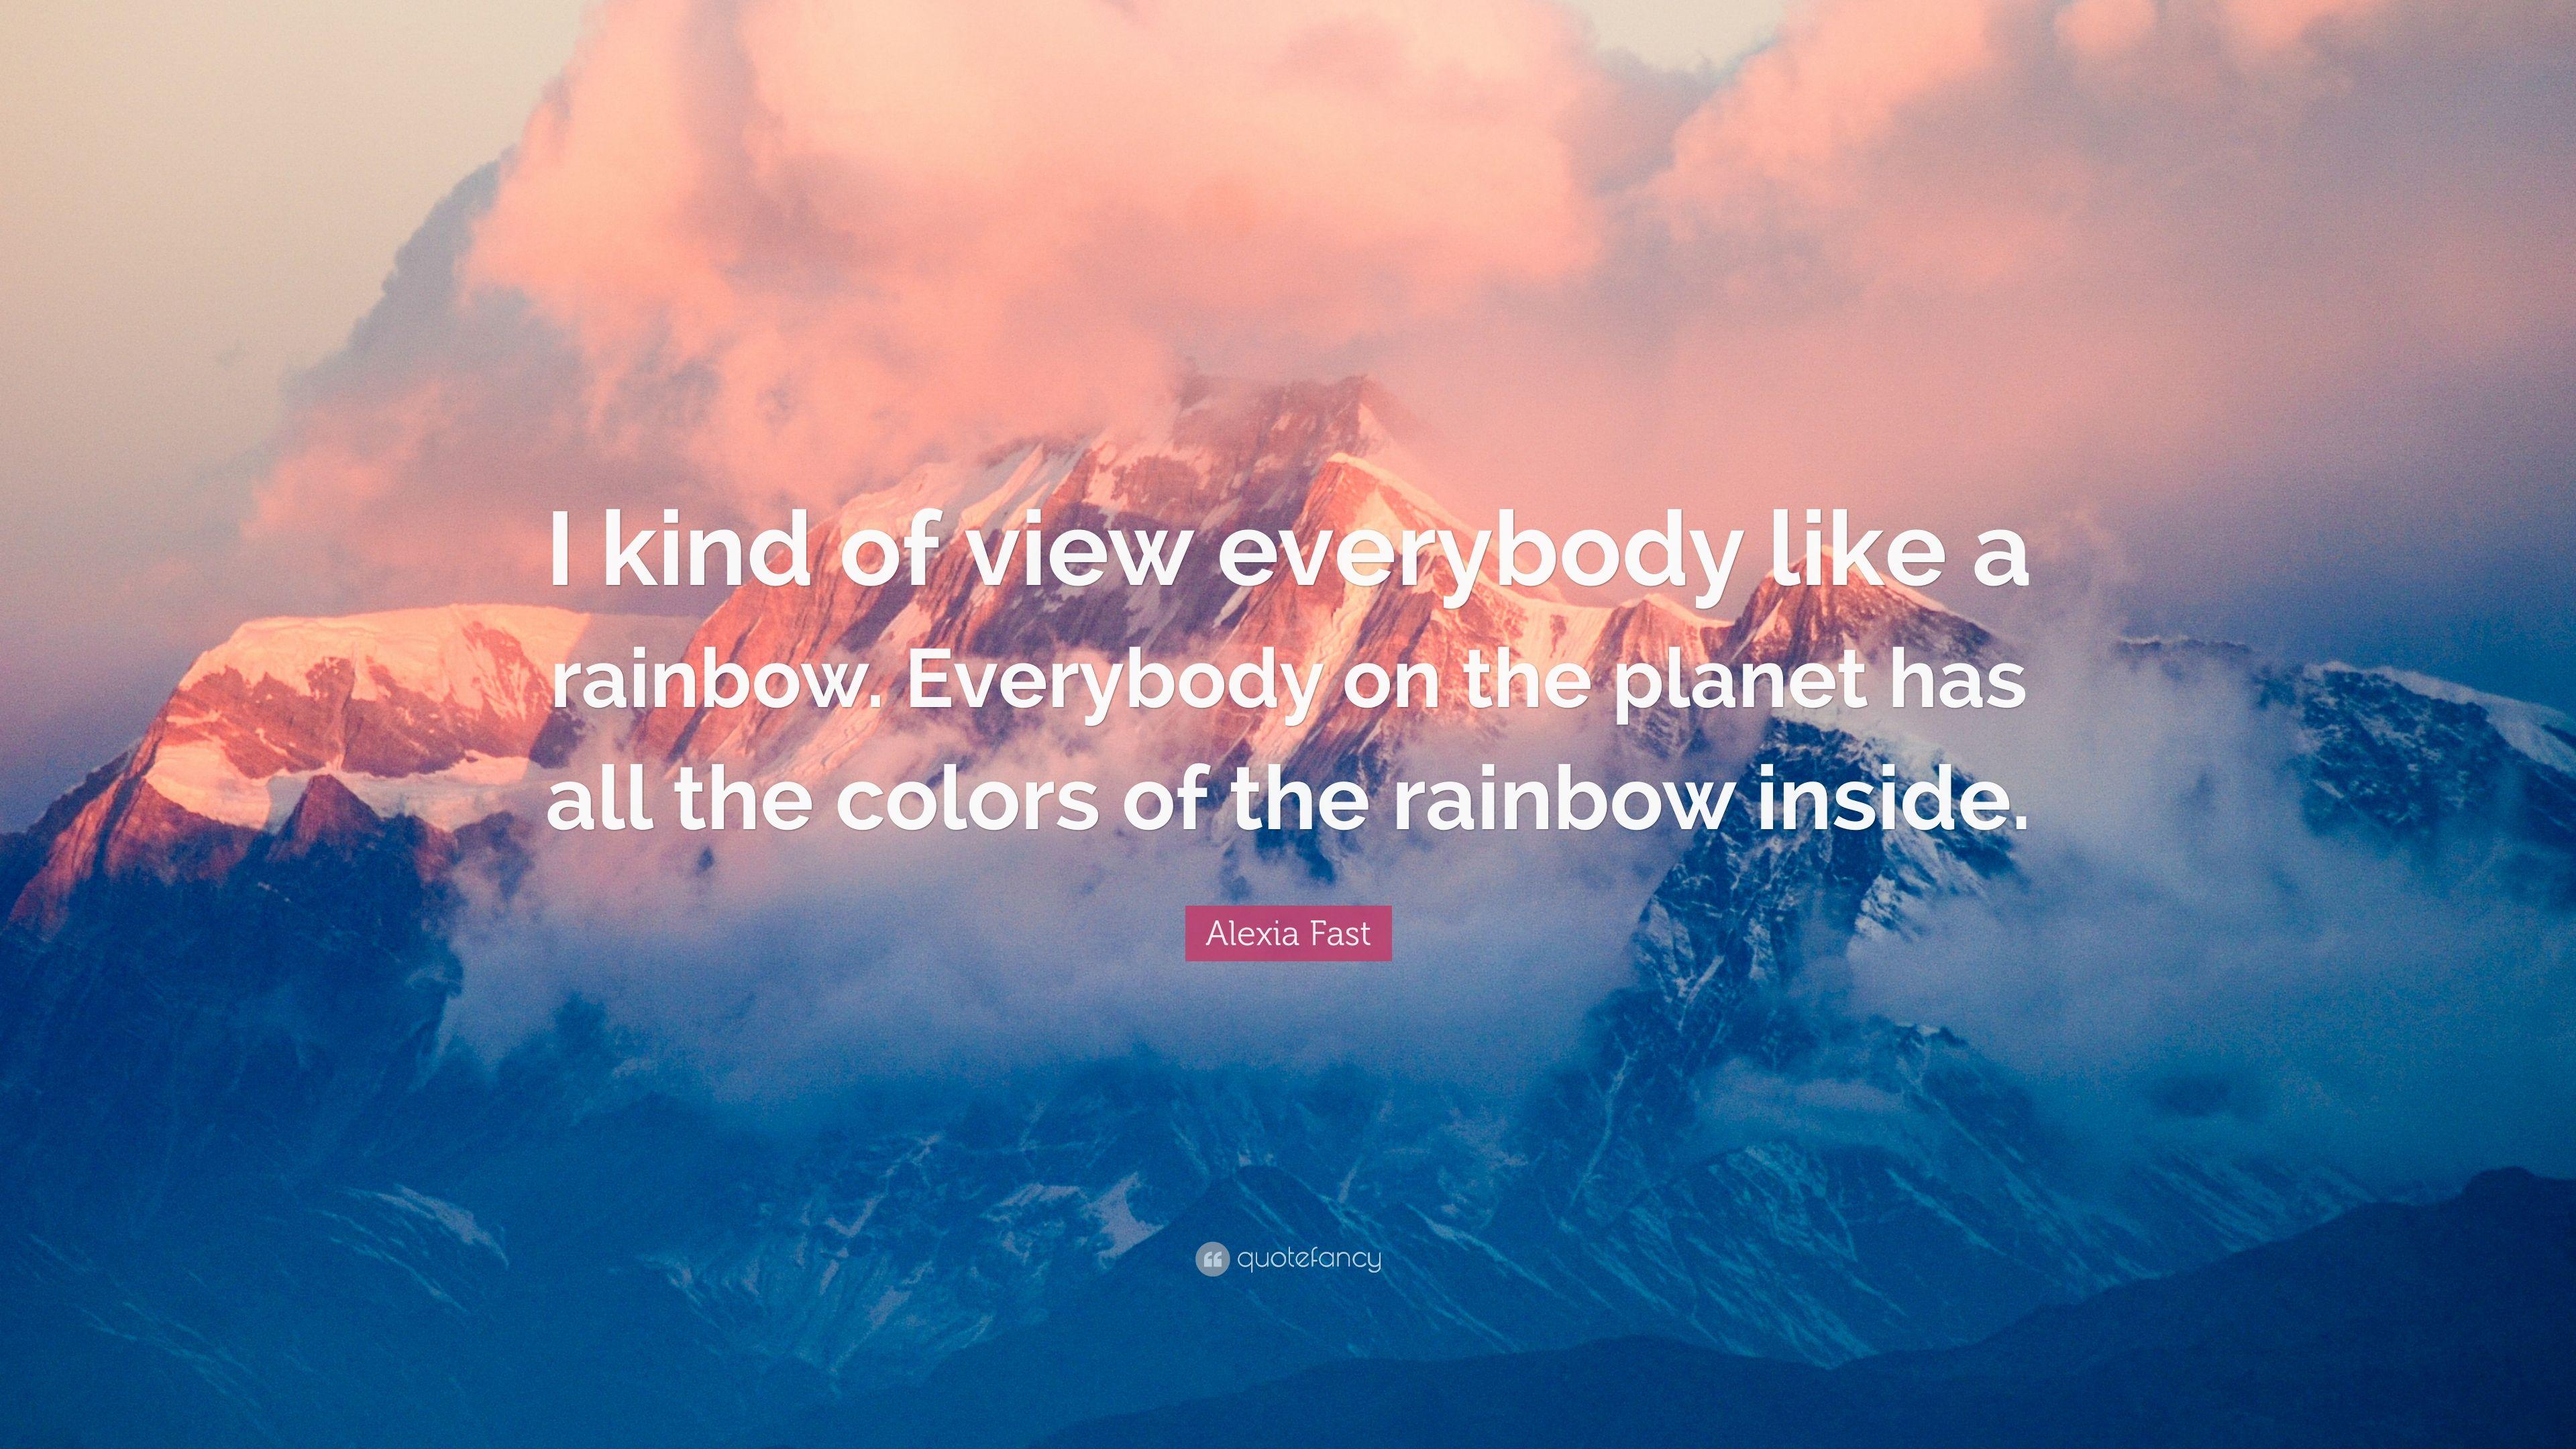 Alexia Fast Quote: “I kind of view everybody like a rainbow